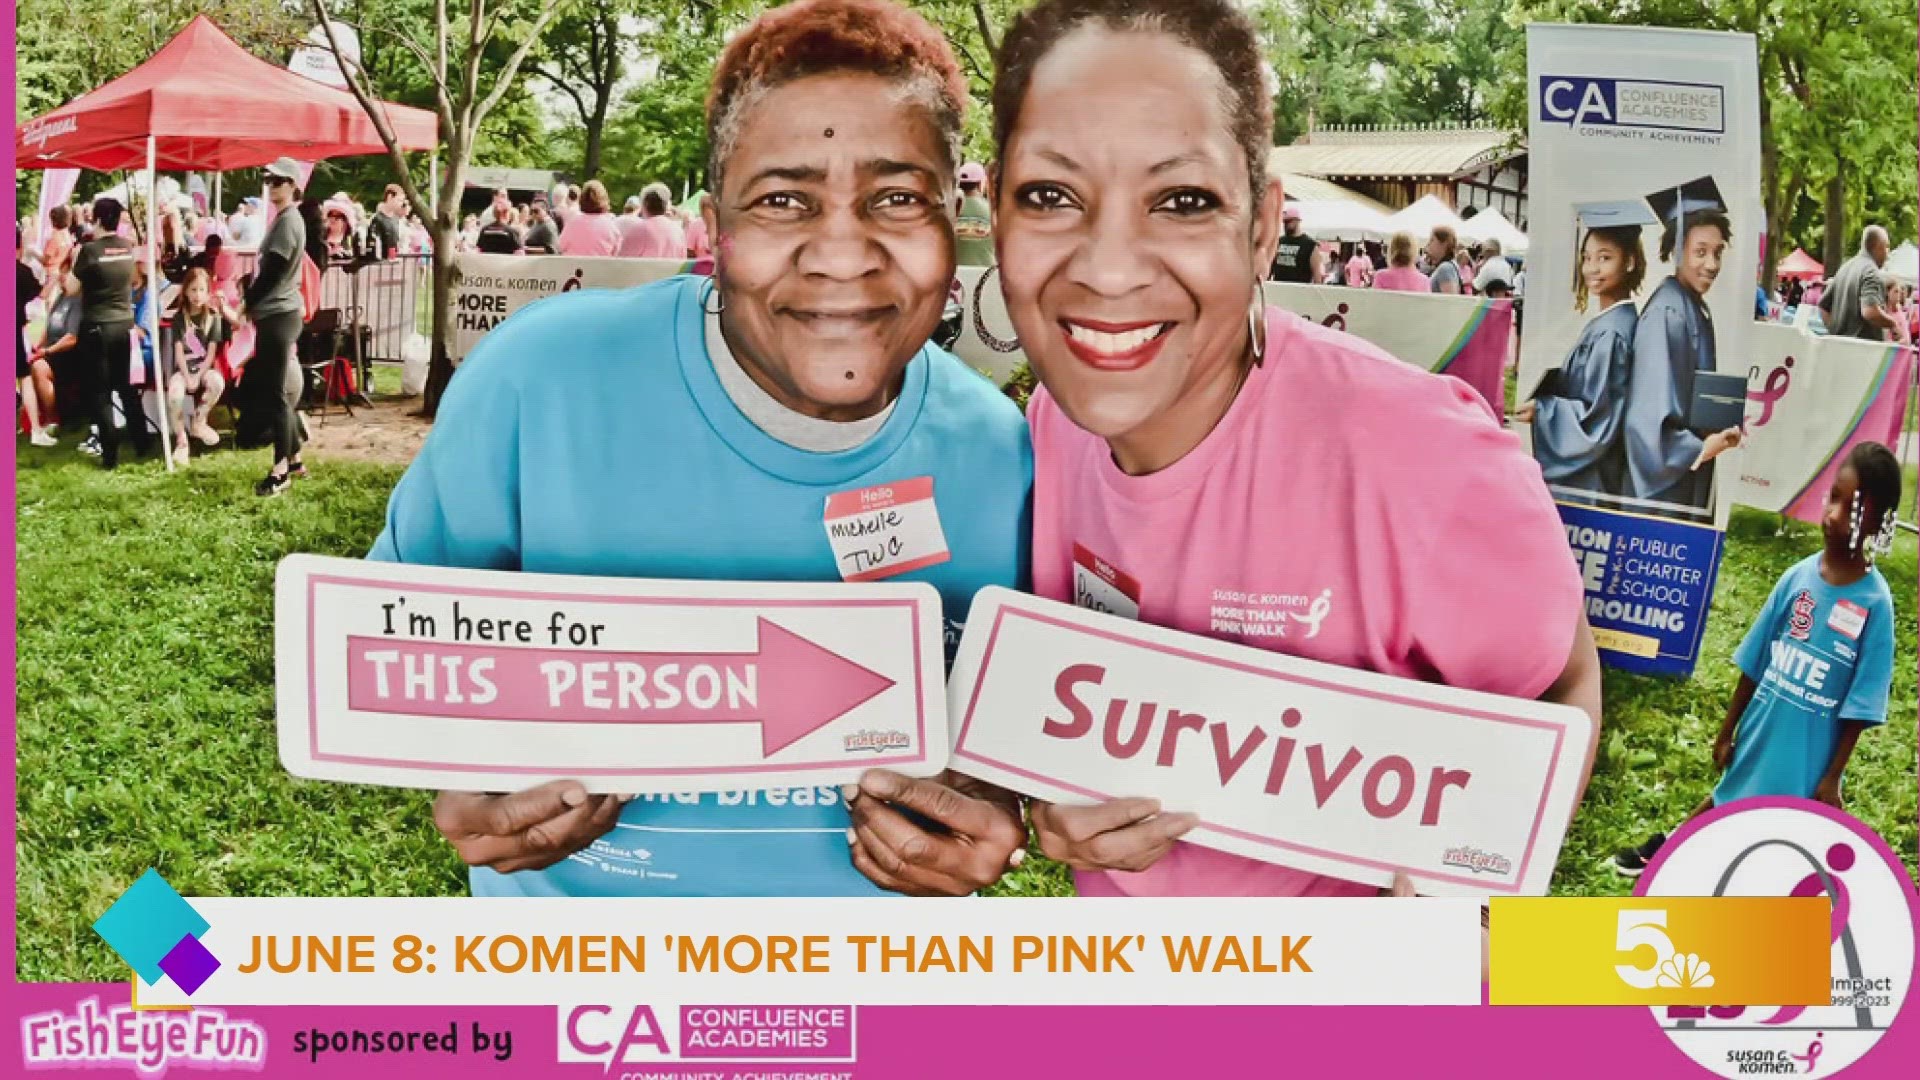 Susan G. Komen is the largest nonprofit funder of breast cancer research outside of the U.S. government.